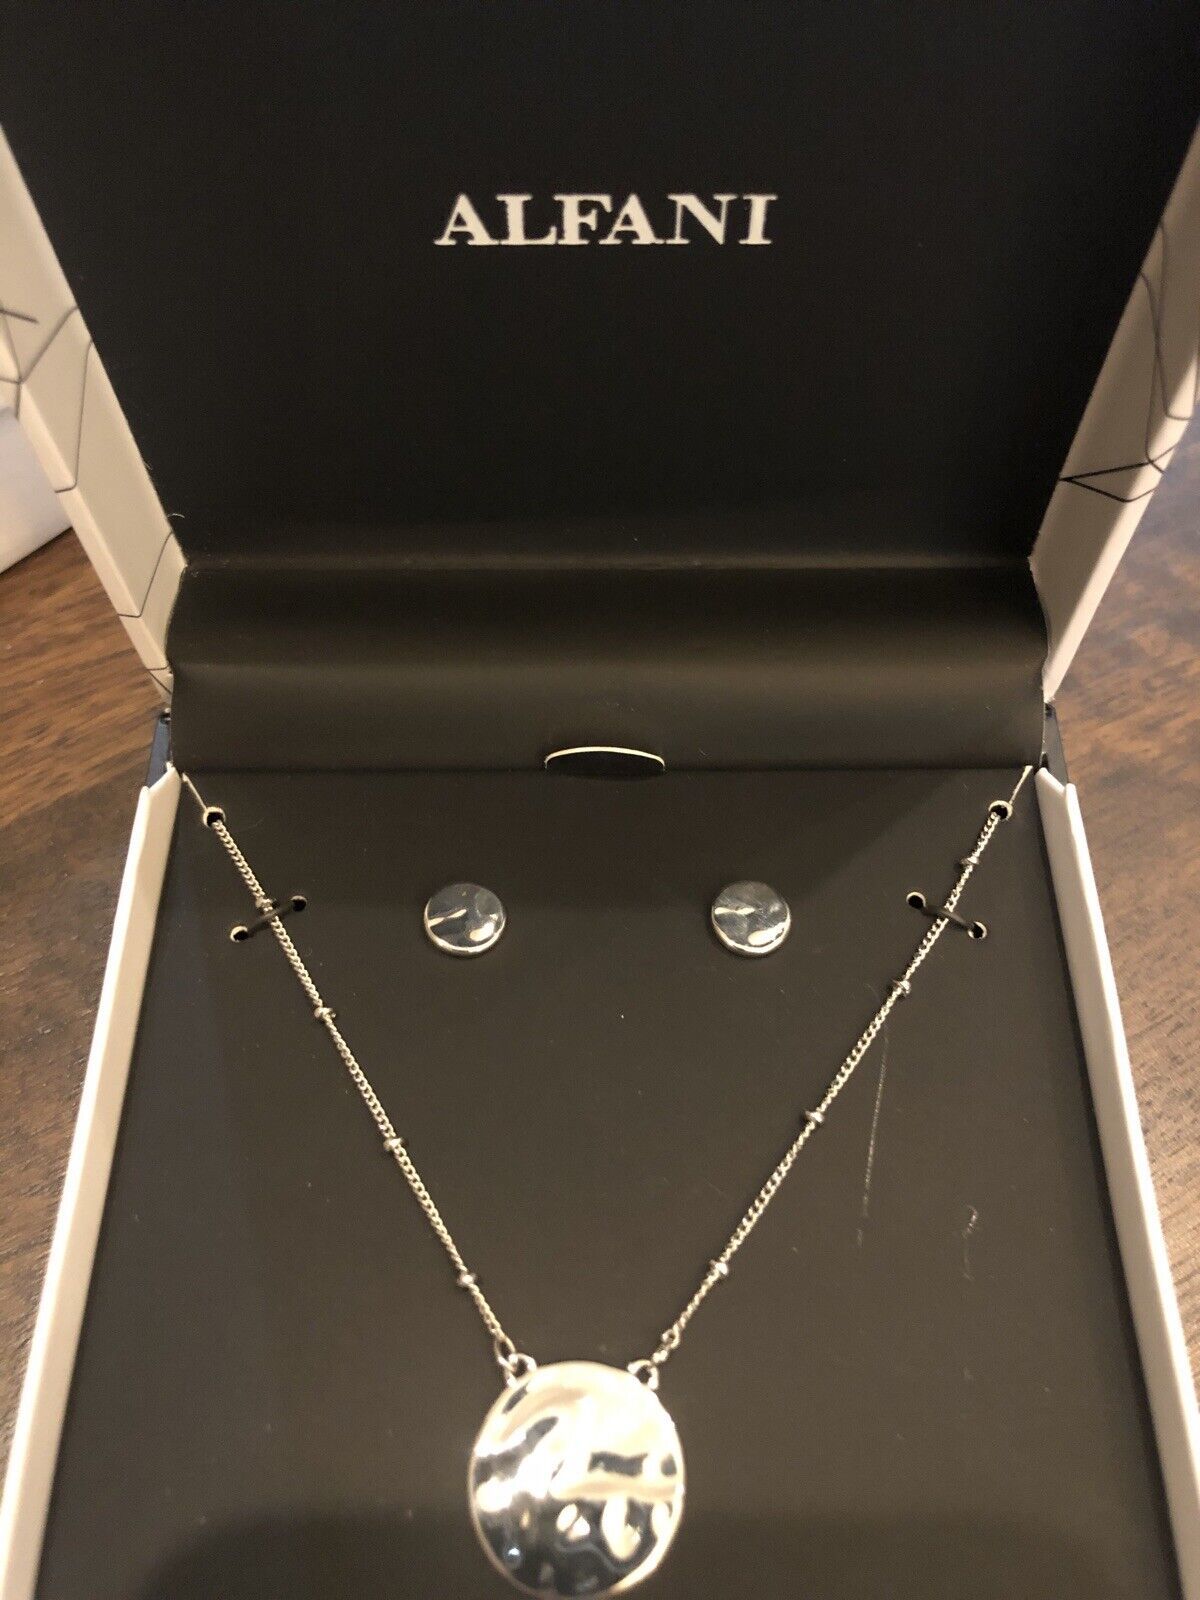 ALFANI SILVER PLATED NECKLACE AND EARRING SET - $14.85